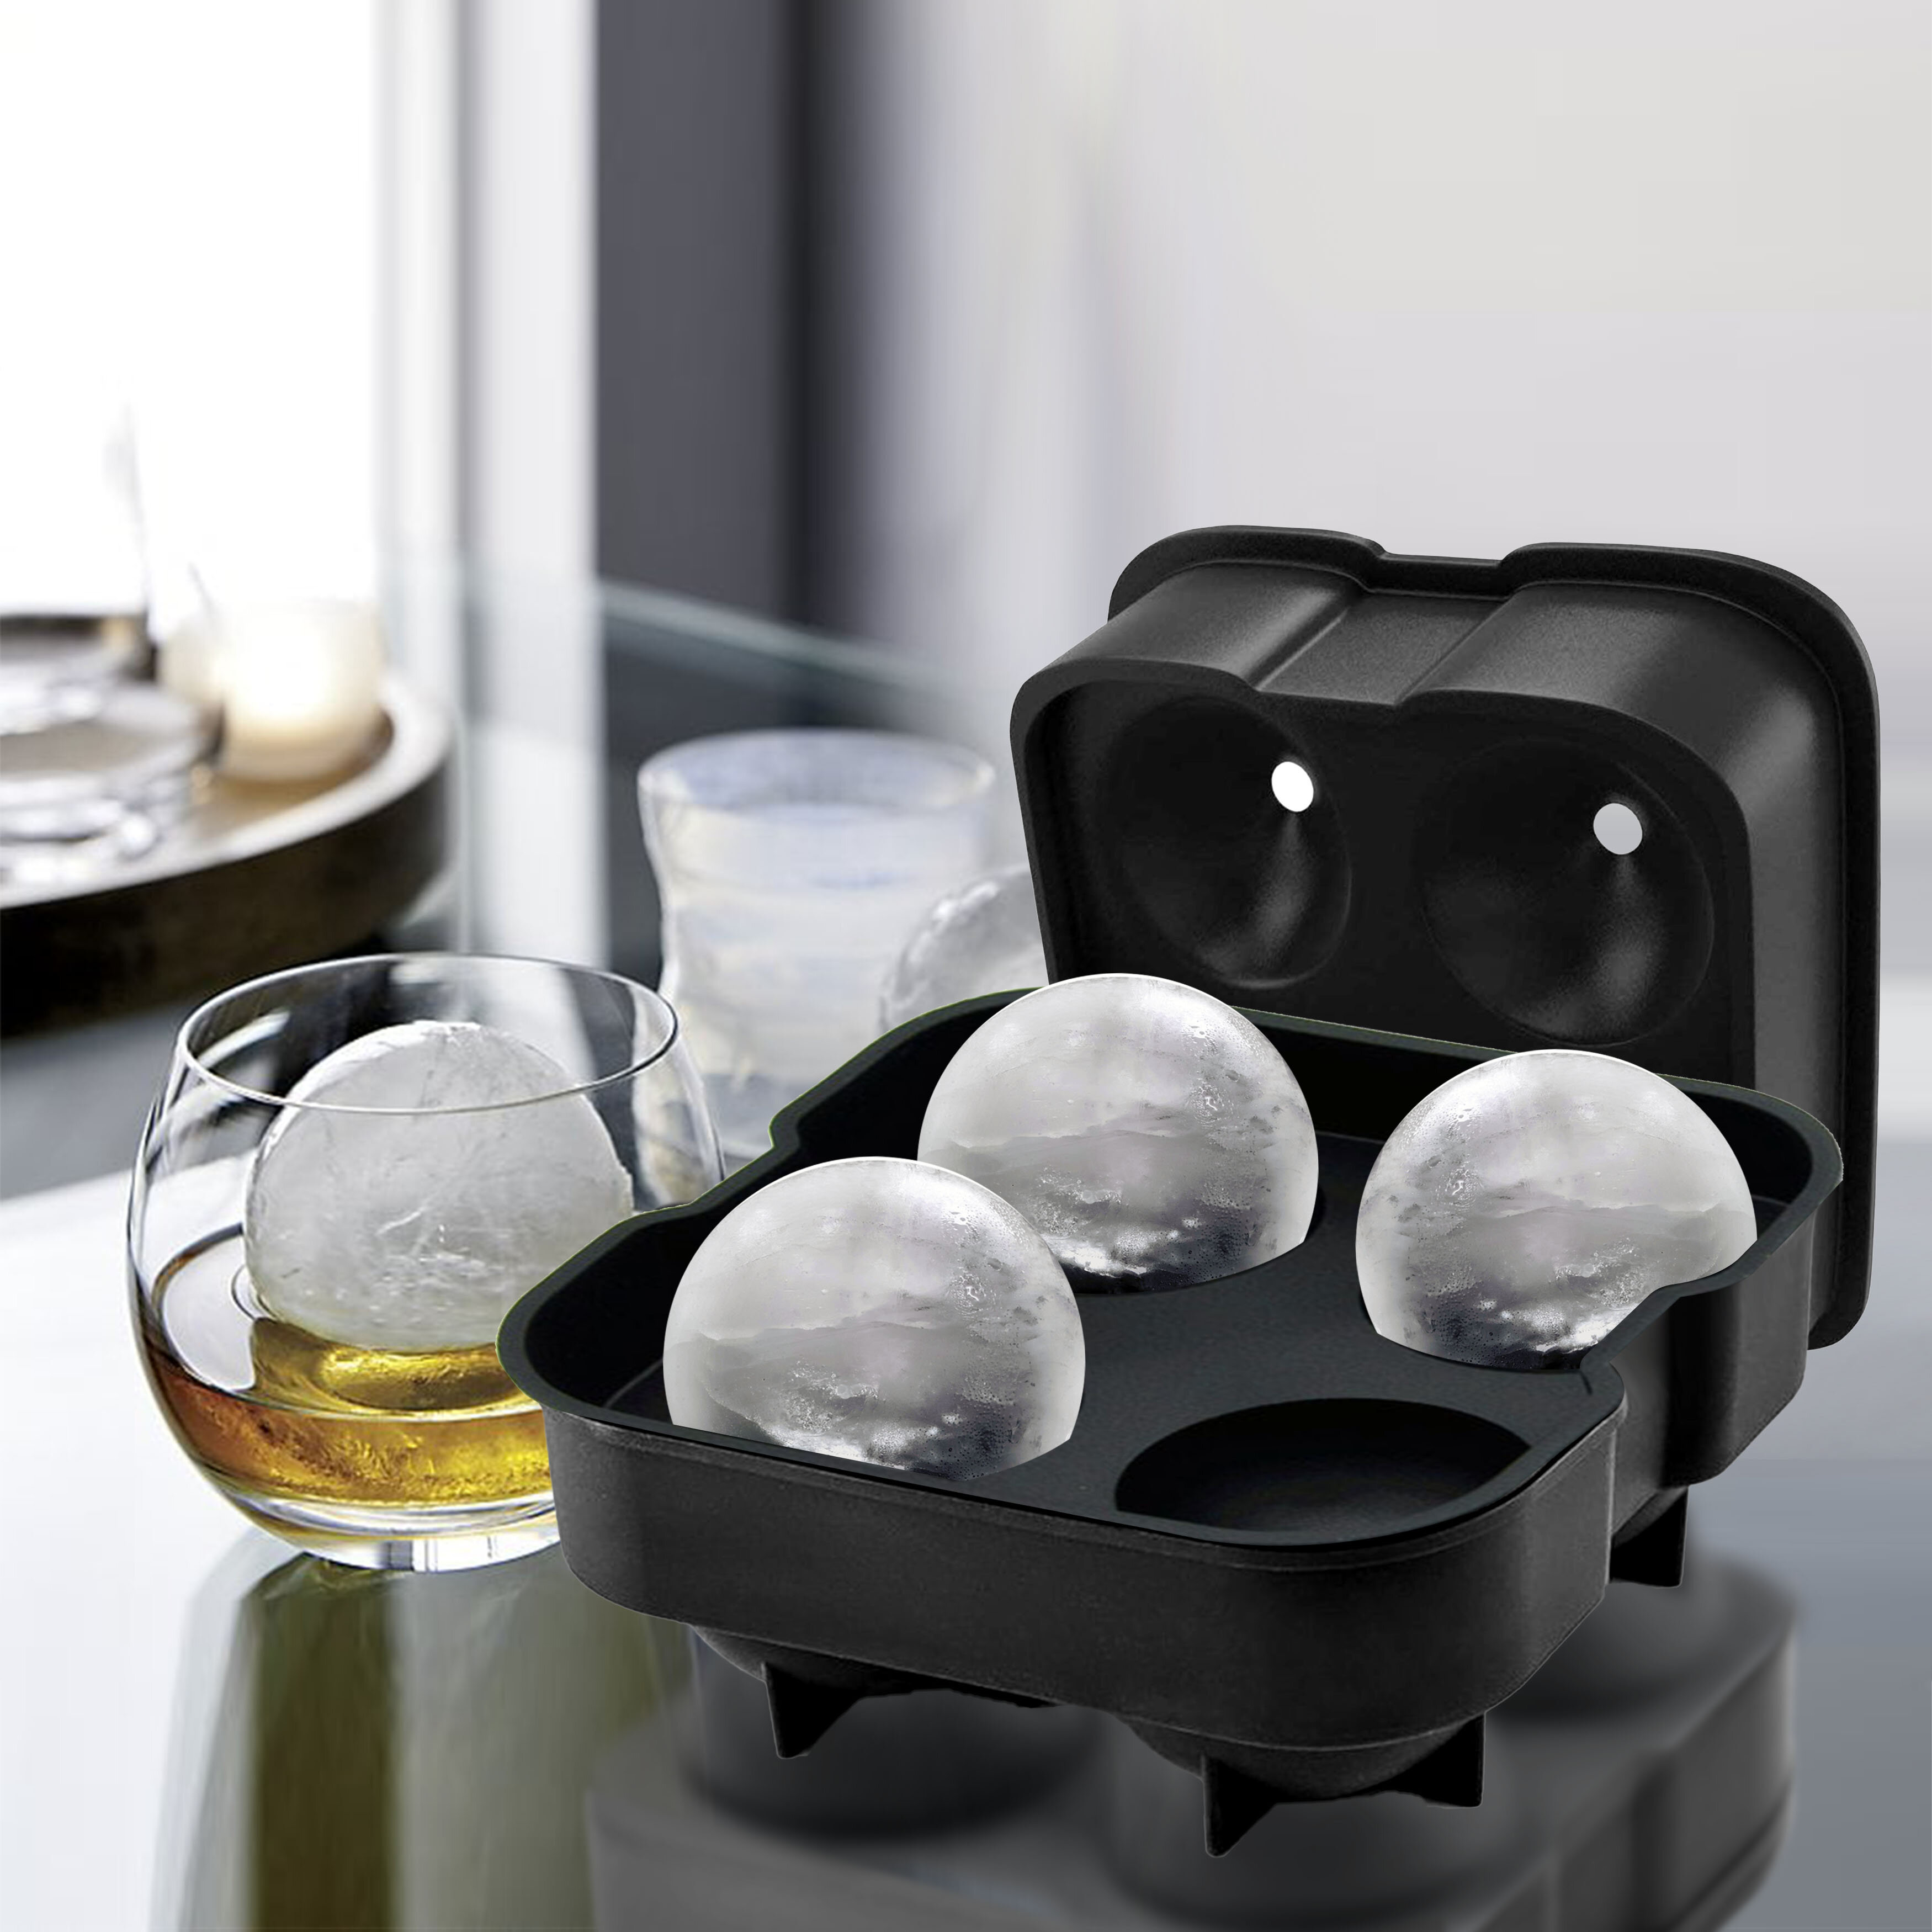 Ice Ball Maker, Round Ice Cube Mold, Easy Release 2.5” Whiskey Ice Mold  with Lid & Funnel, Silicone Ice Cube Tray for Cocktail & Bourbon Black